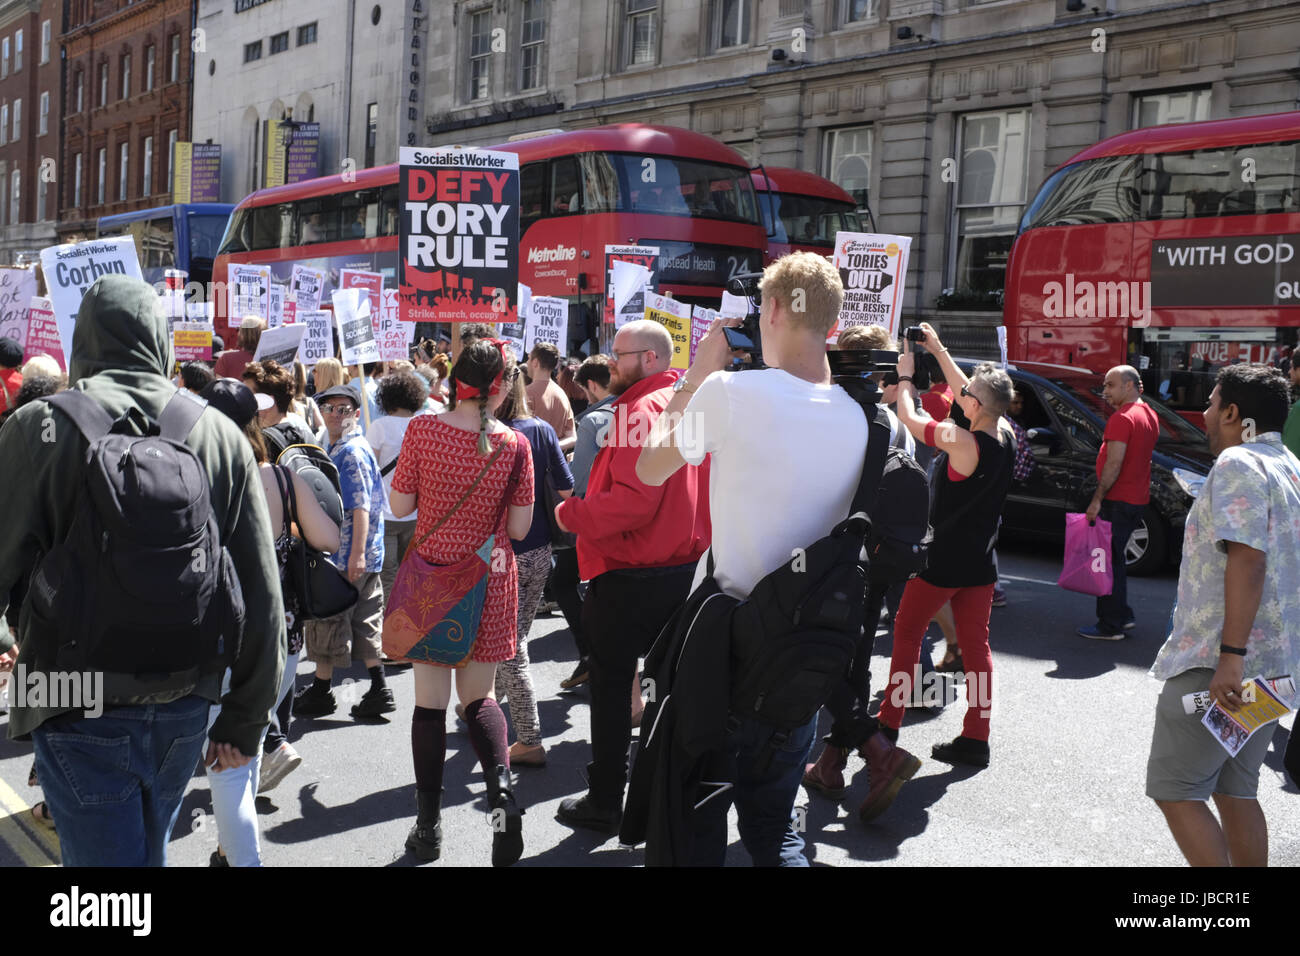 Protesters on Whitehall Street. Protesters on the streets of London, protesting the Tory Government and Prime Minister Theresa May. Stock Photo